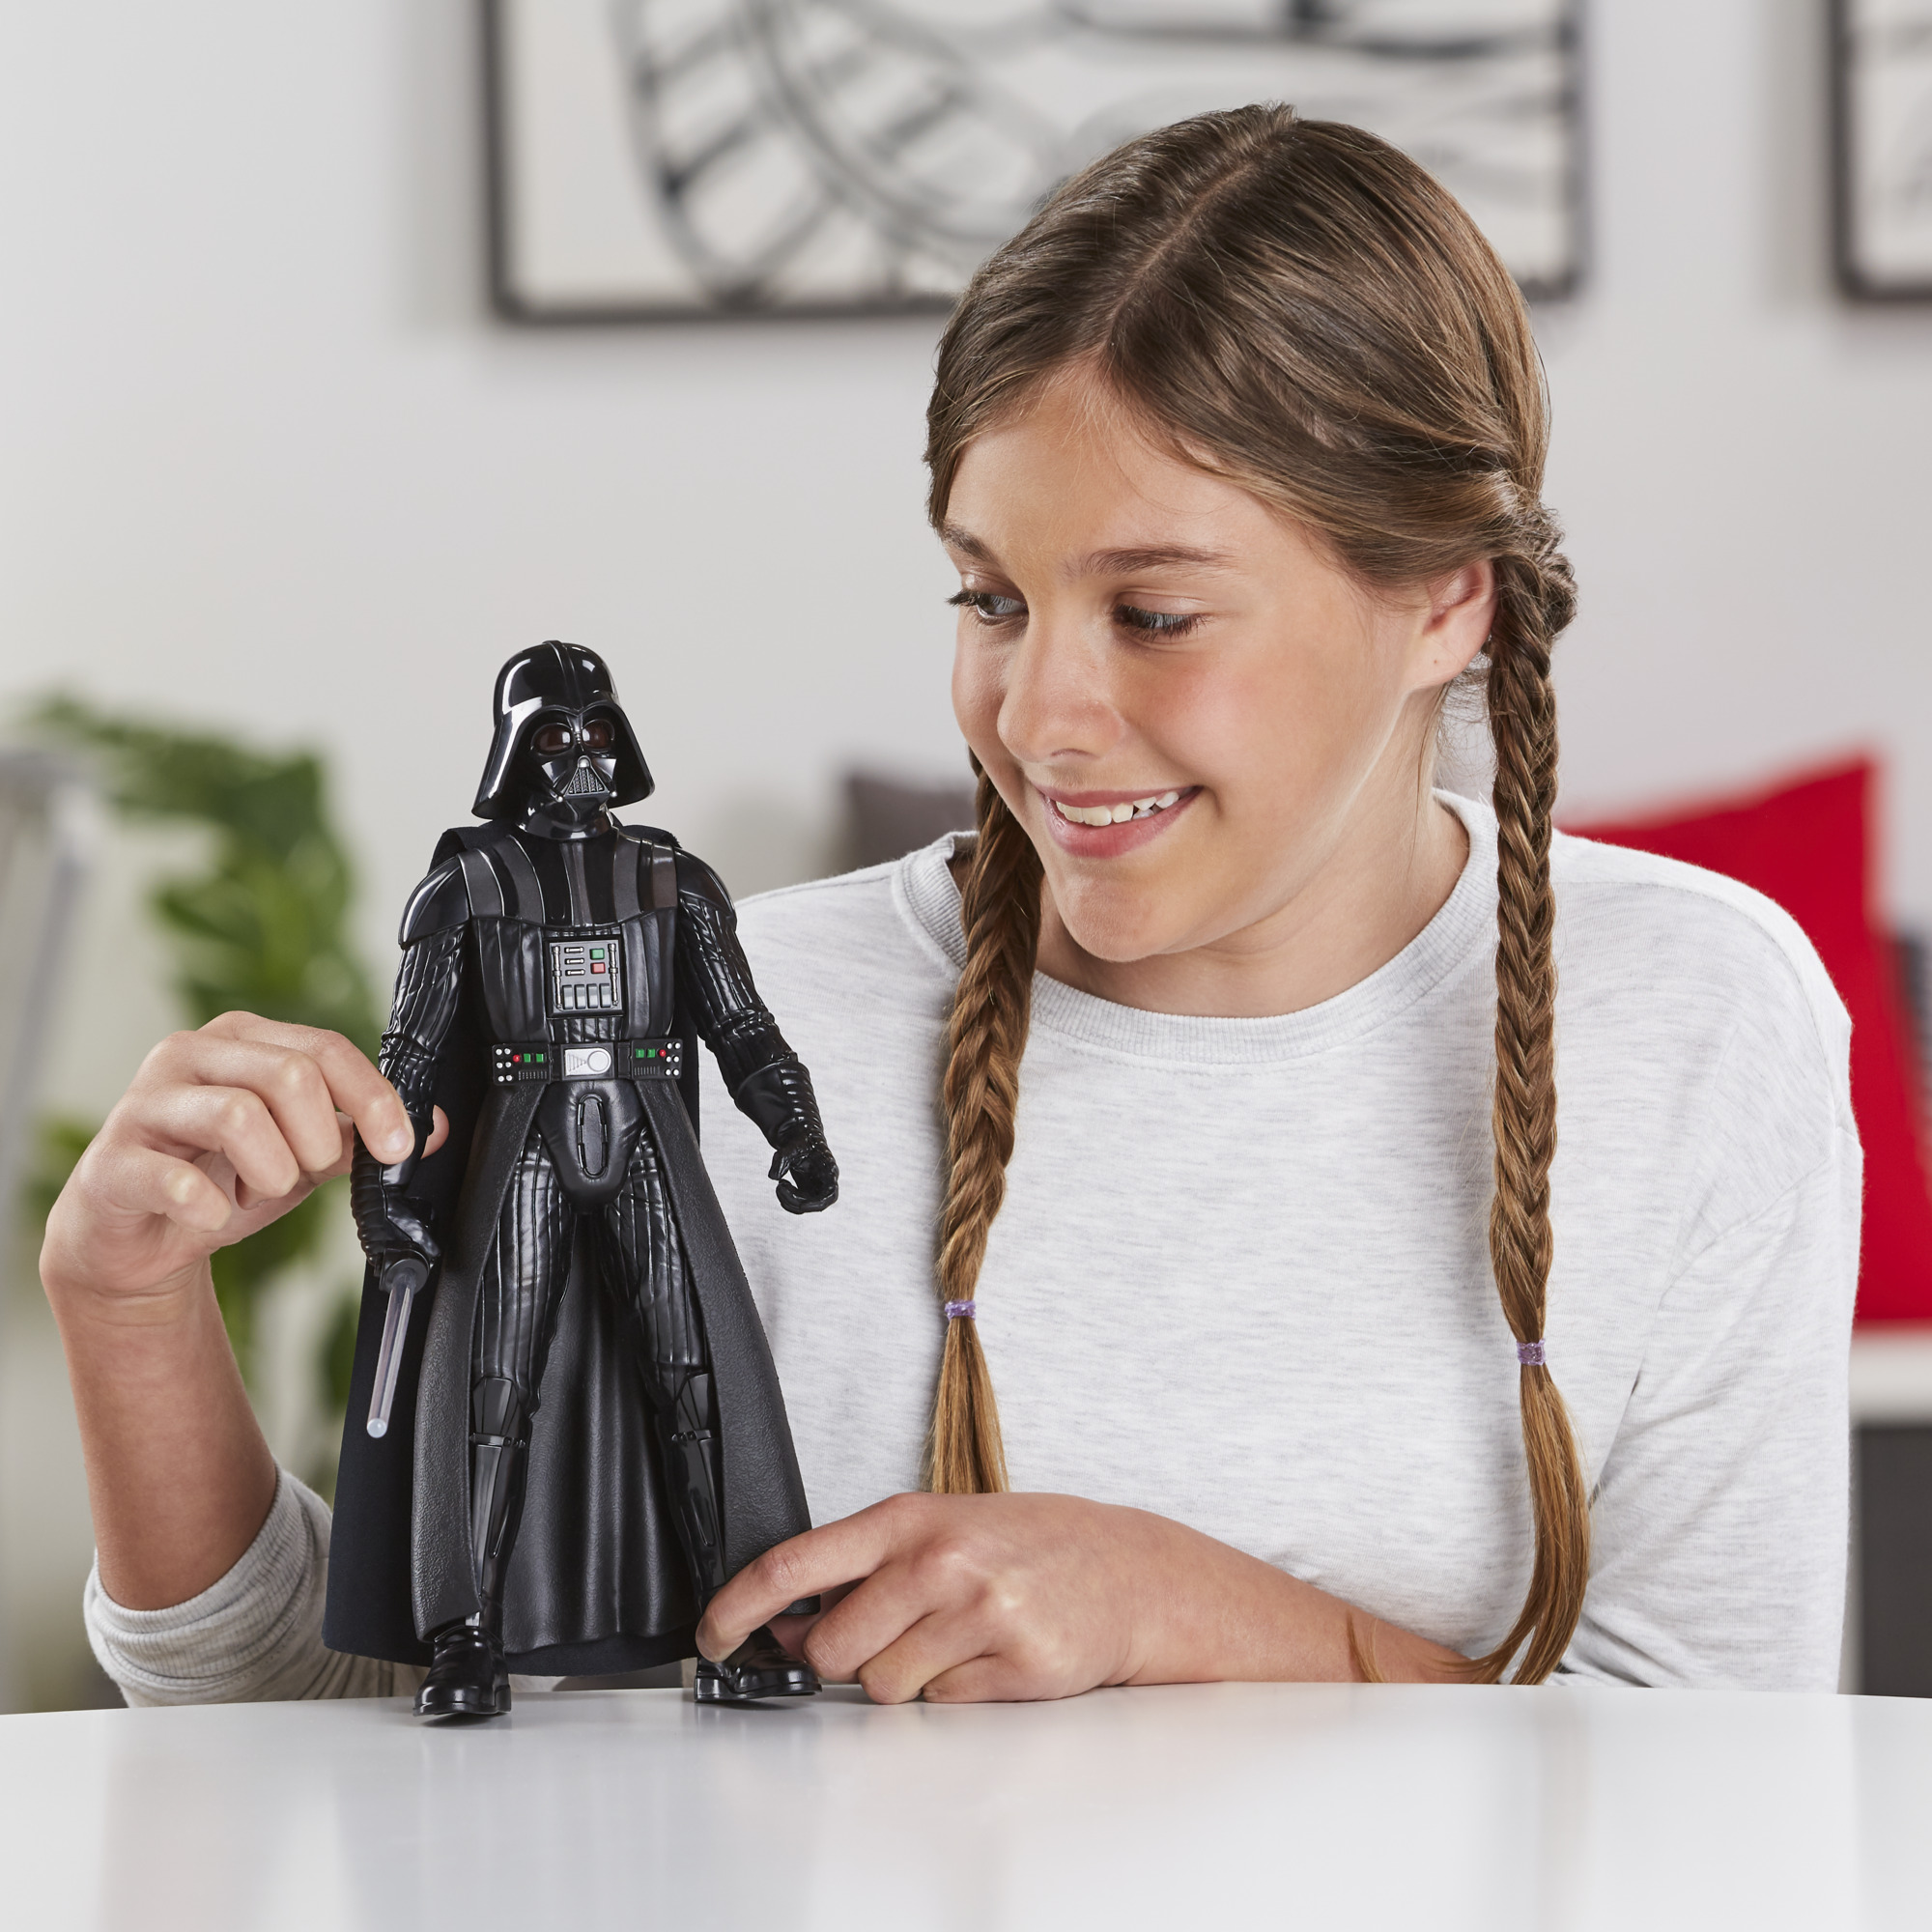 Star Wars: Obi-Wan Kenobi Darth Vader Toy Action Figure for Boys and Girls Ages 4 5 6 7 8 and Up (12”) - image 5 of 11